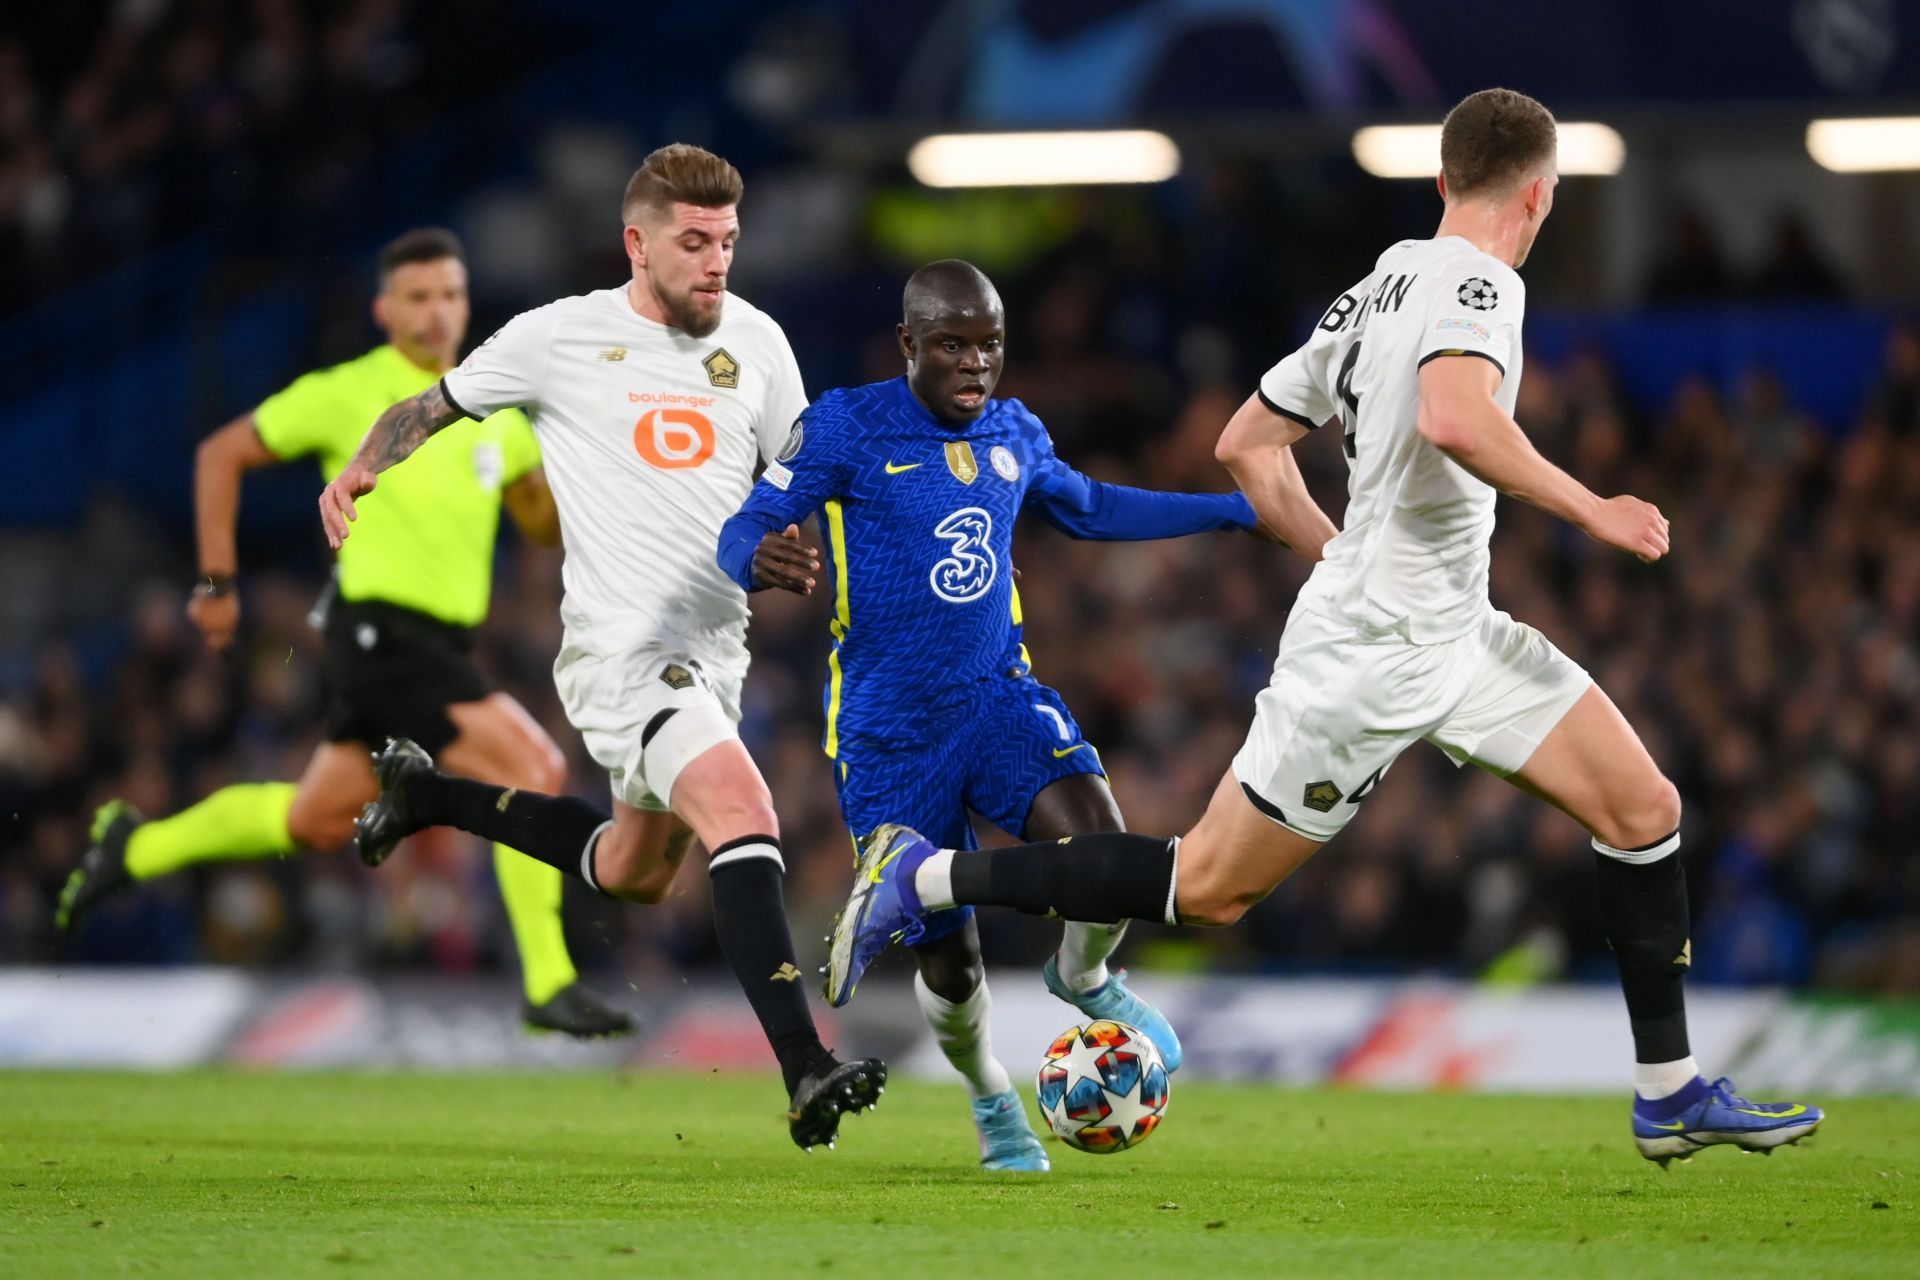 Kante battles two Lille OSC players for possession in an earlier game